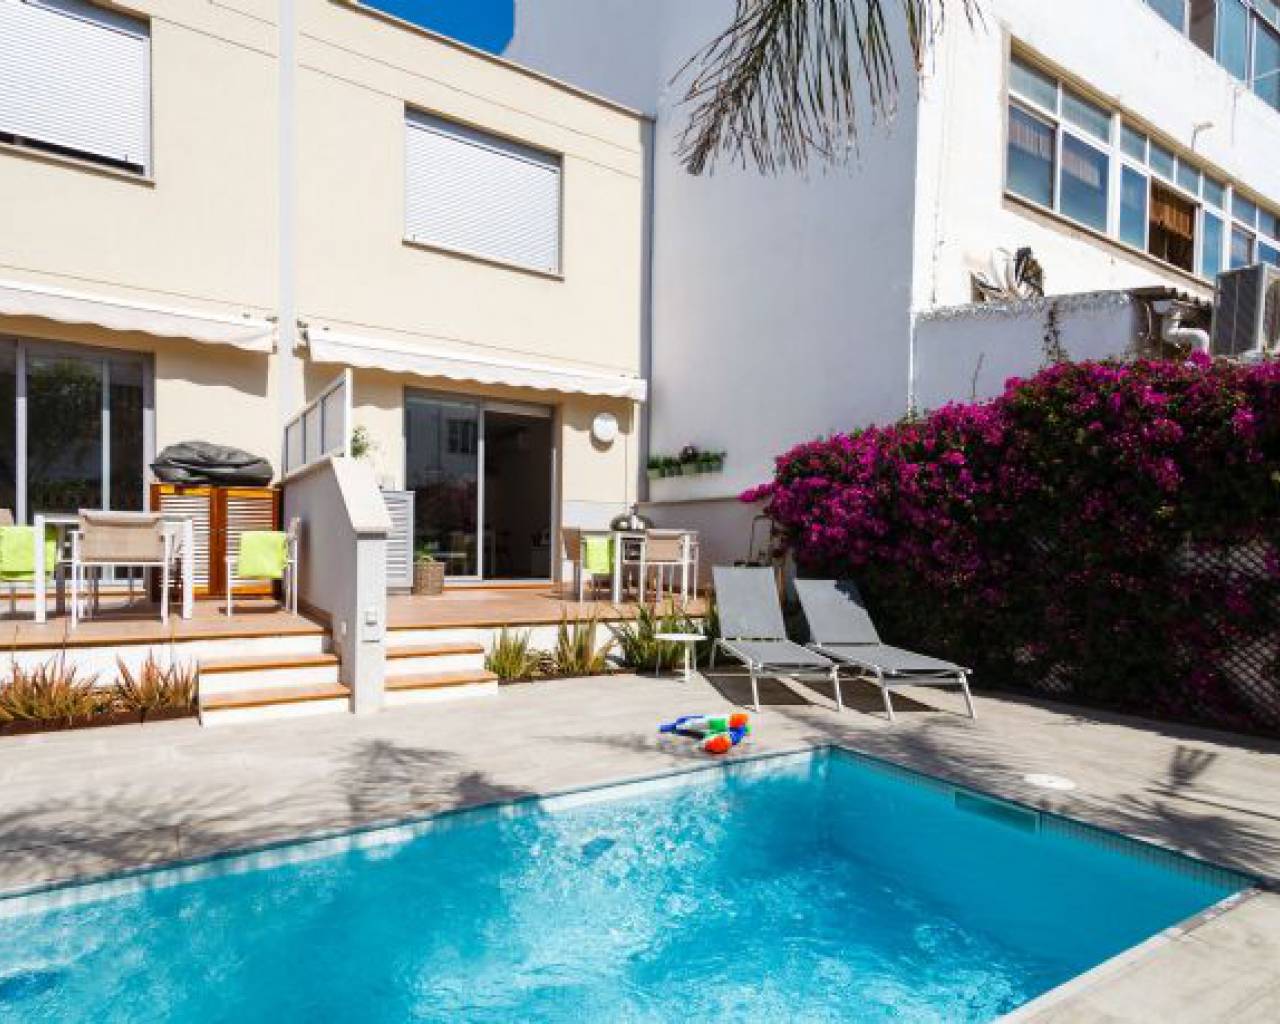 Property  with a swimming pool for rent in -Mallorca rental agents